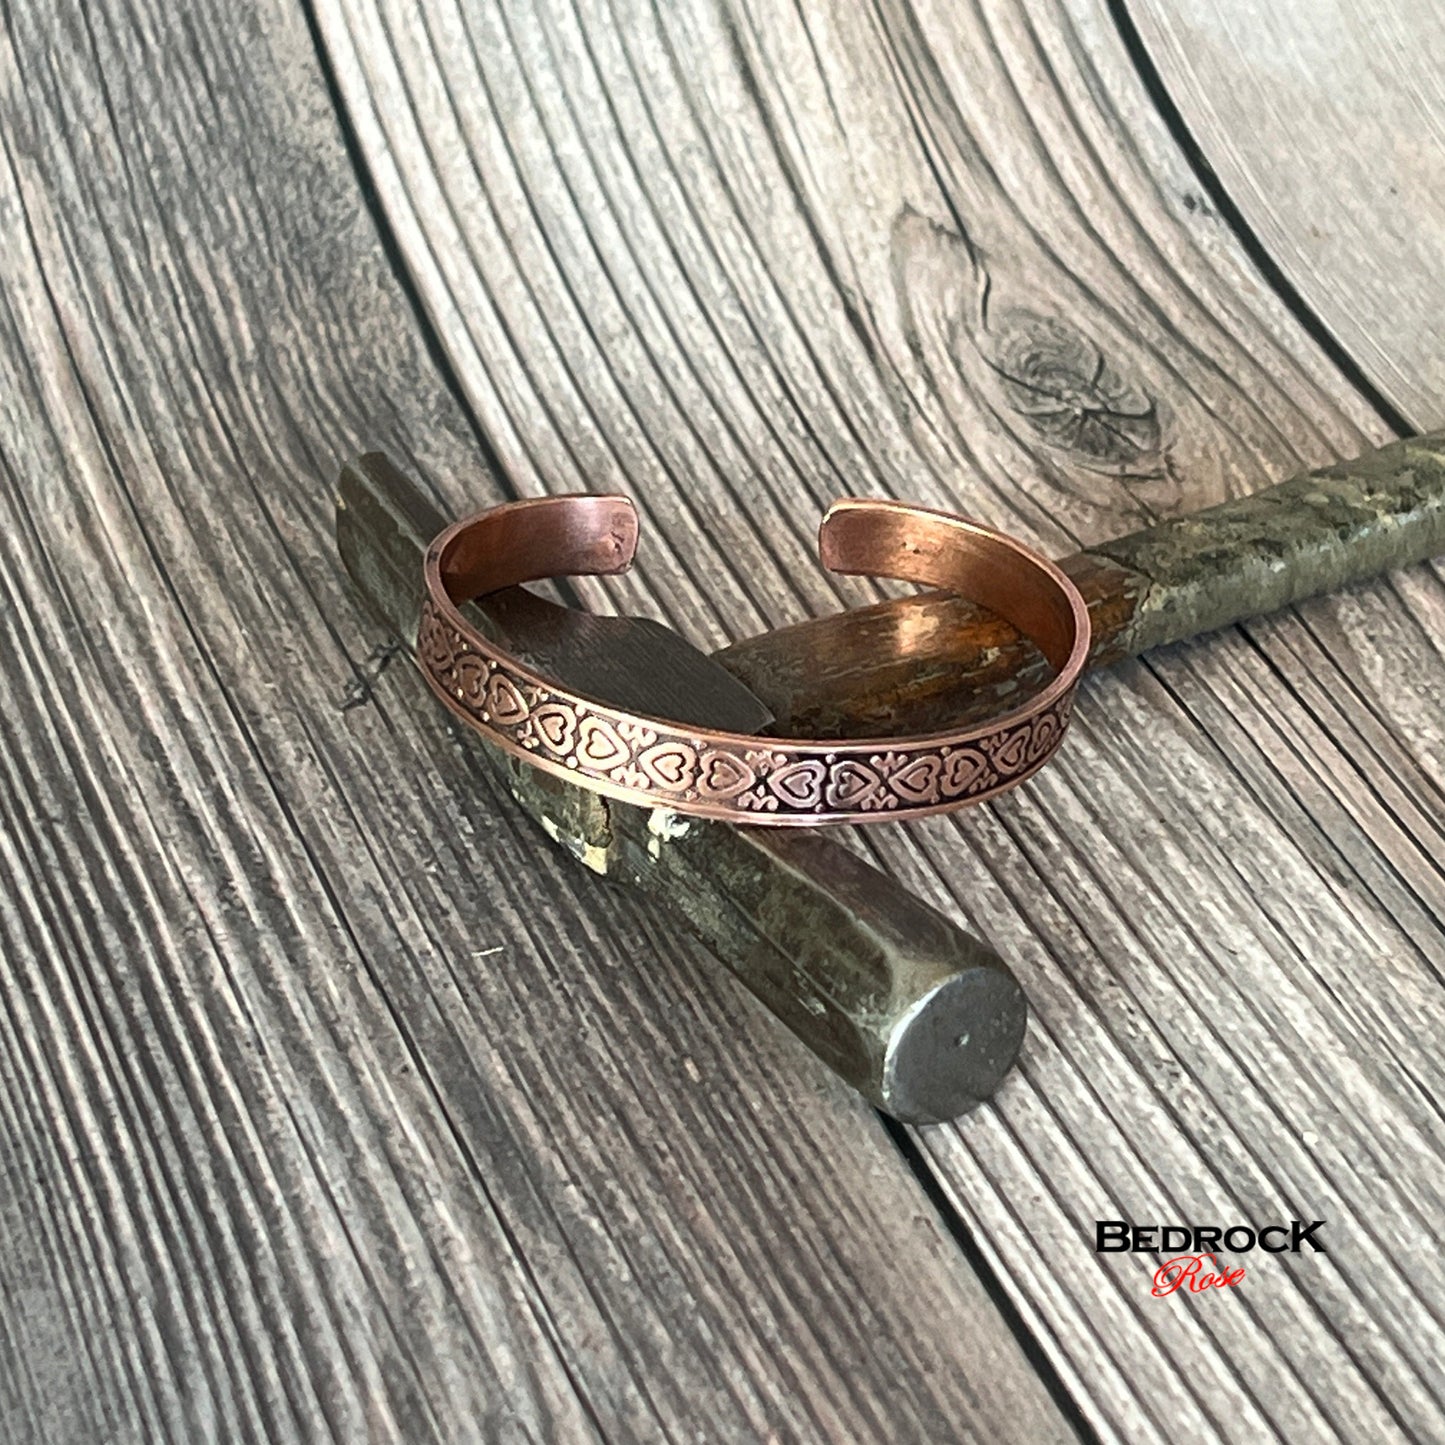 valentines day, valentine, valentine, valentines day gift, gifts for her, gifts for girlfriend,gifts for wife,  anniversary, marriage, love, lovely love, love your wife, promise cuff, copper cuff, copper jewelry, love jewelry, durable, arm cuff, arm band, bracelet, bracelet for girlfriend